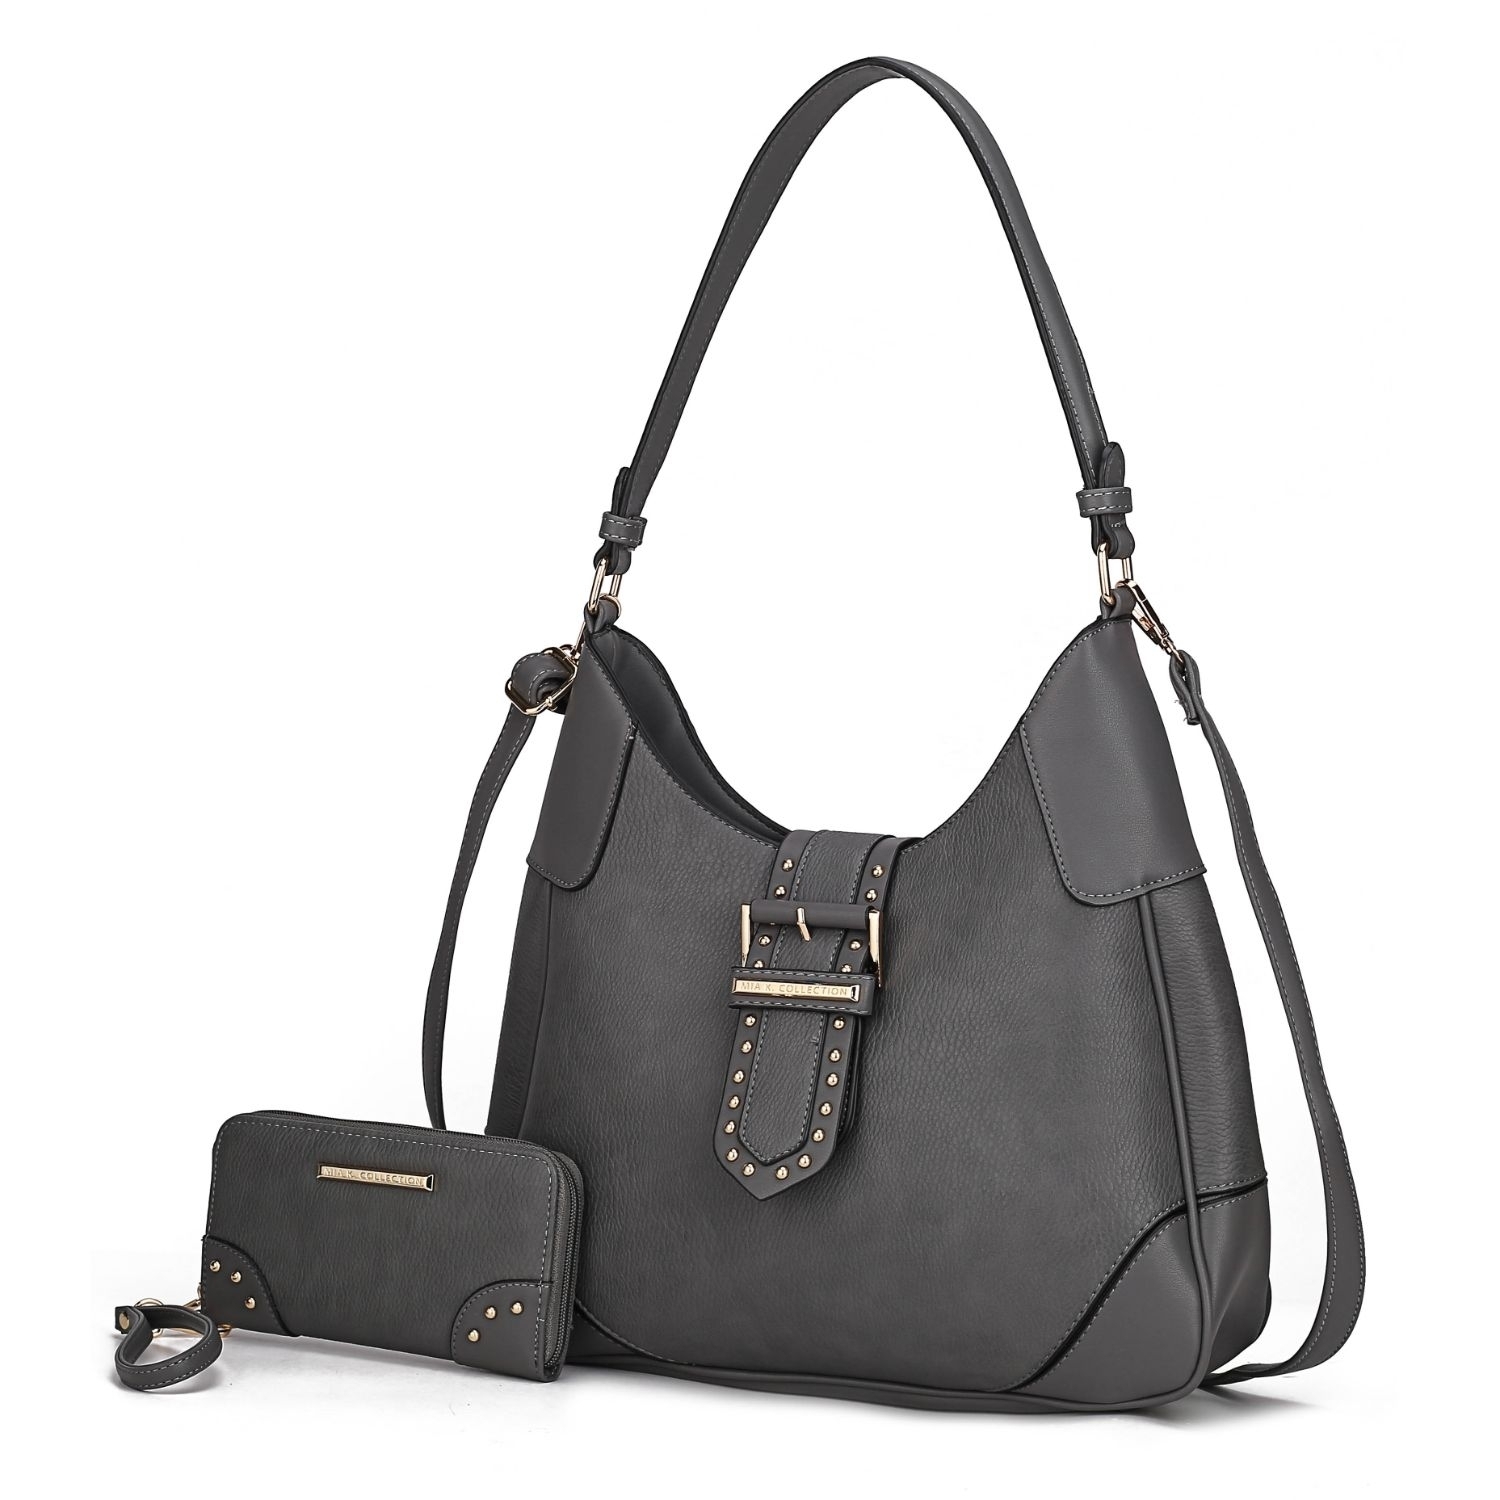 MKF Collection Juliette Shoulder Handbag With Matching Wallet 2 Pcs By Mia K. - Charcoal